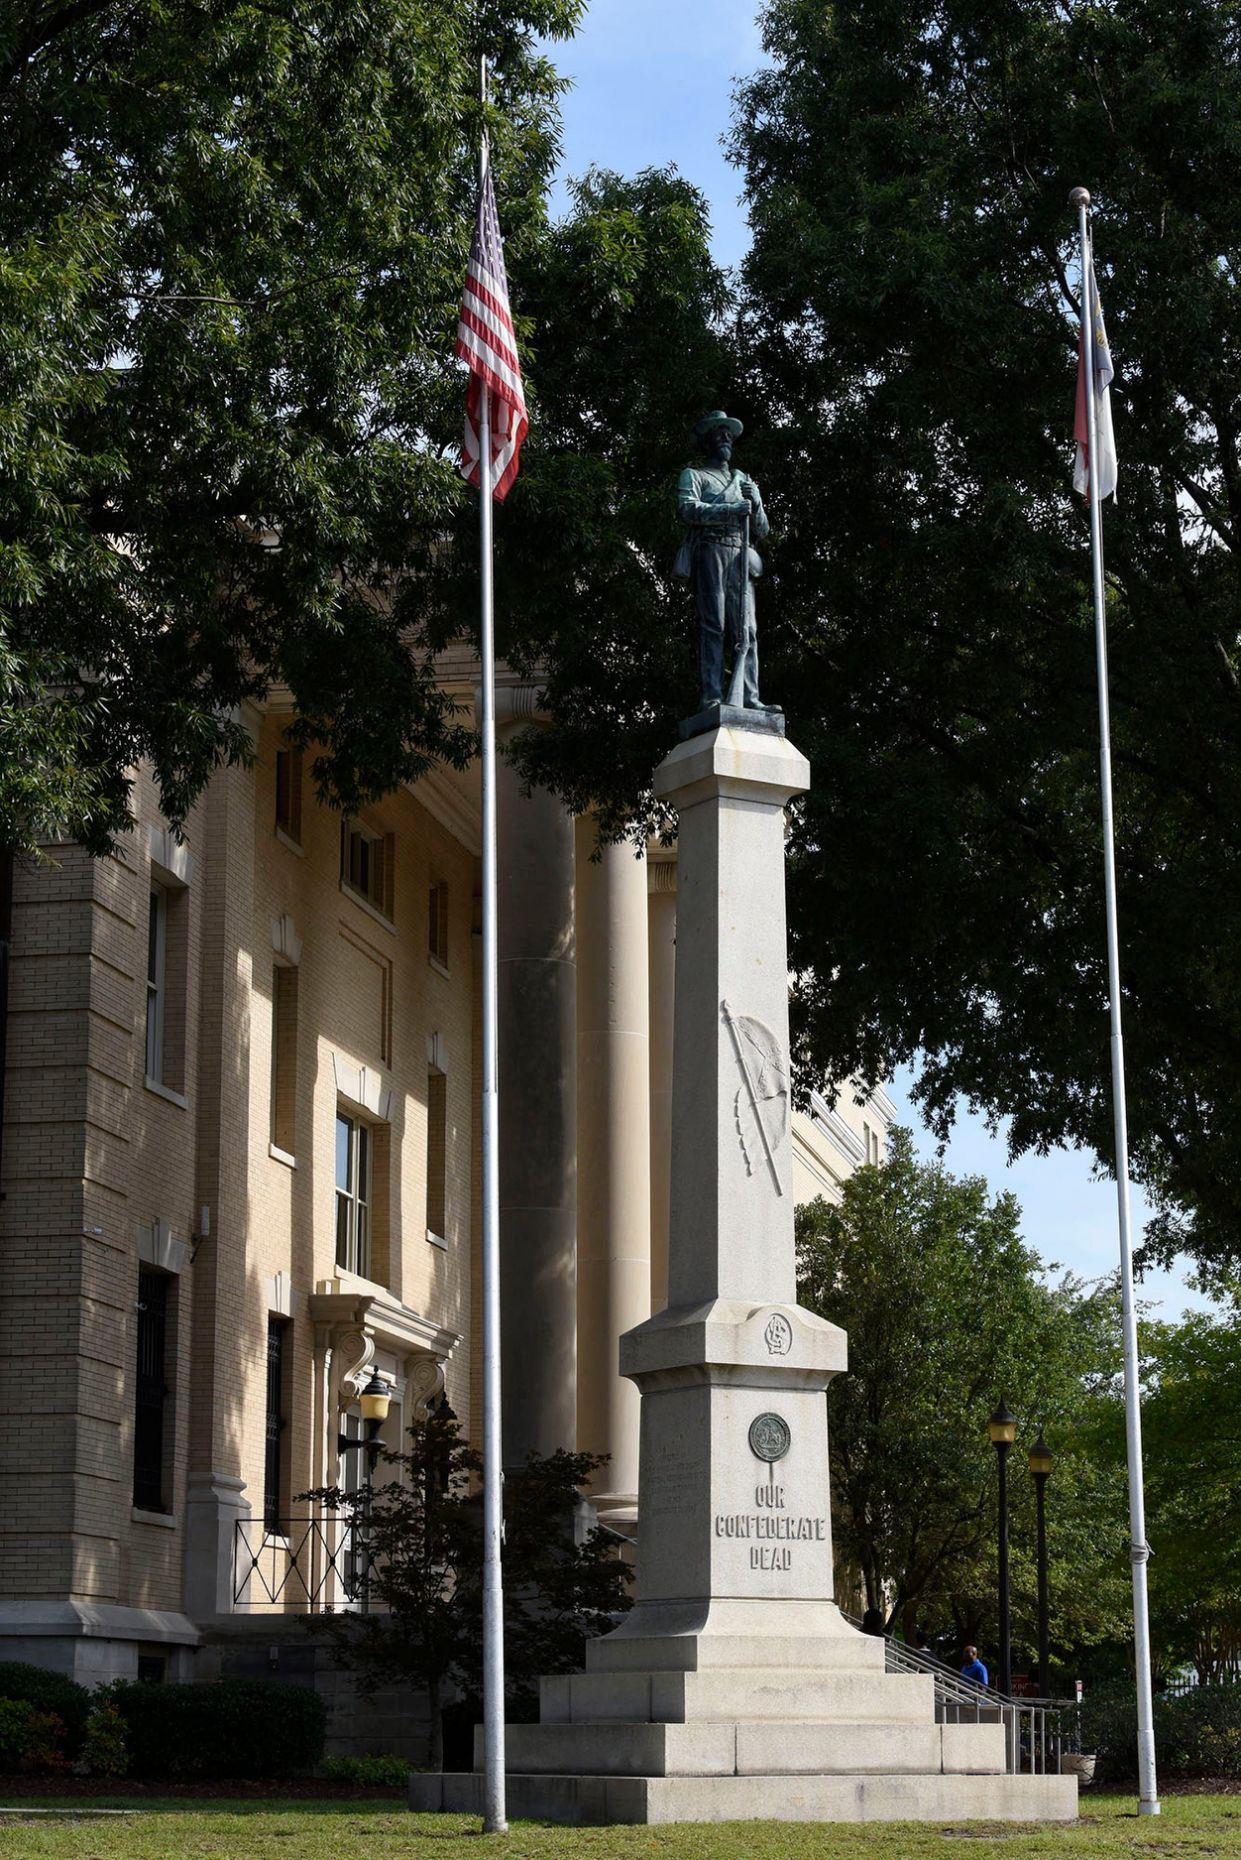 A Confederate statue stands outside the courthouse in Greenville, N.C.